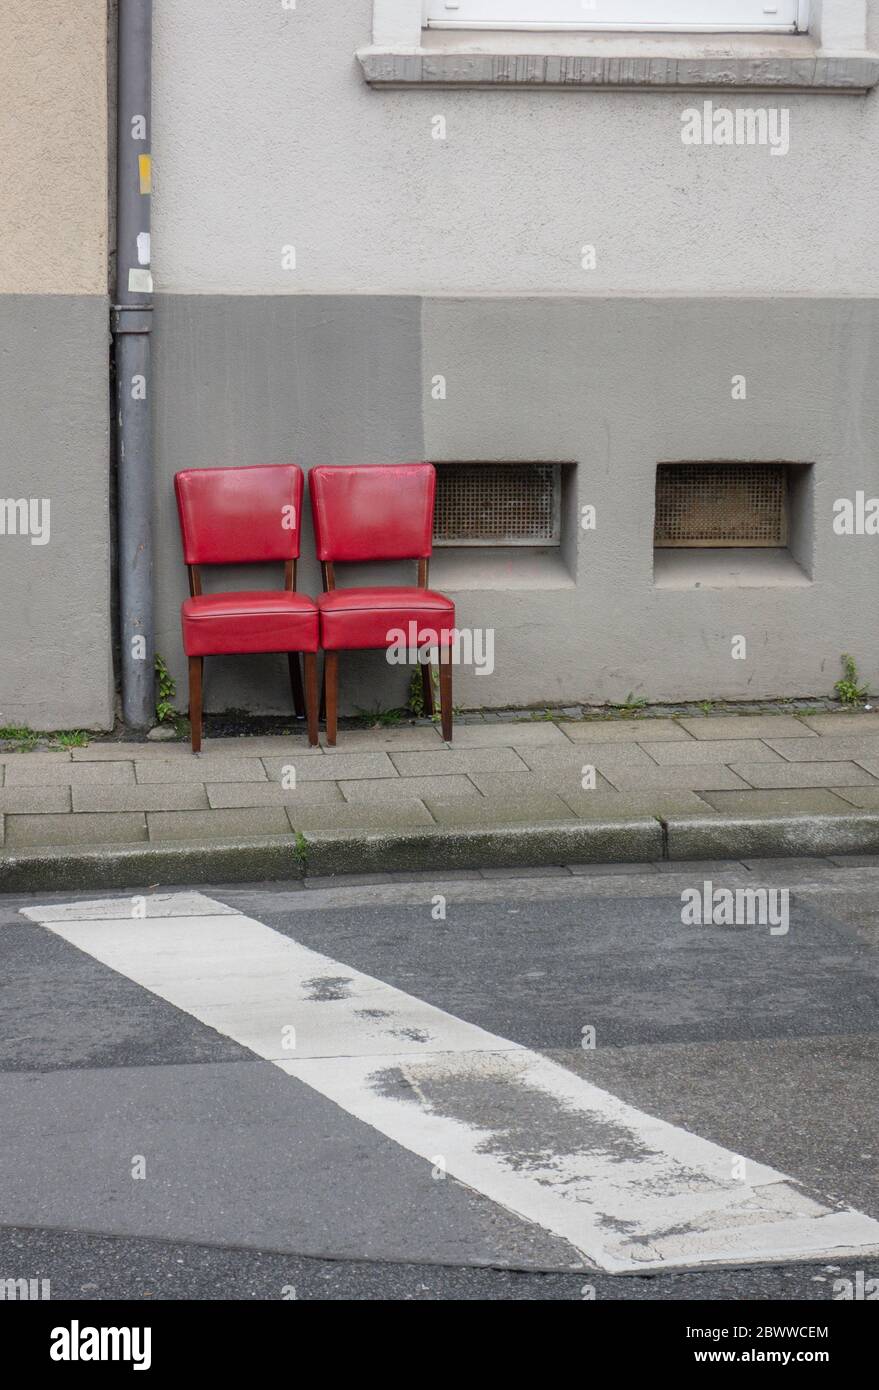 Two red old chairs standing side by side on pavement Stock Photo